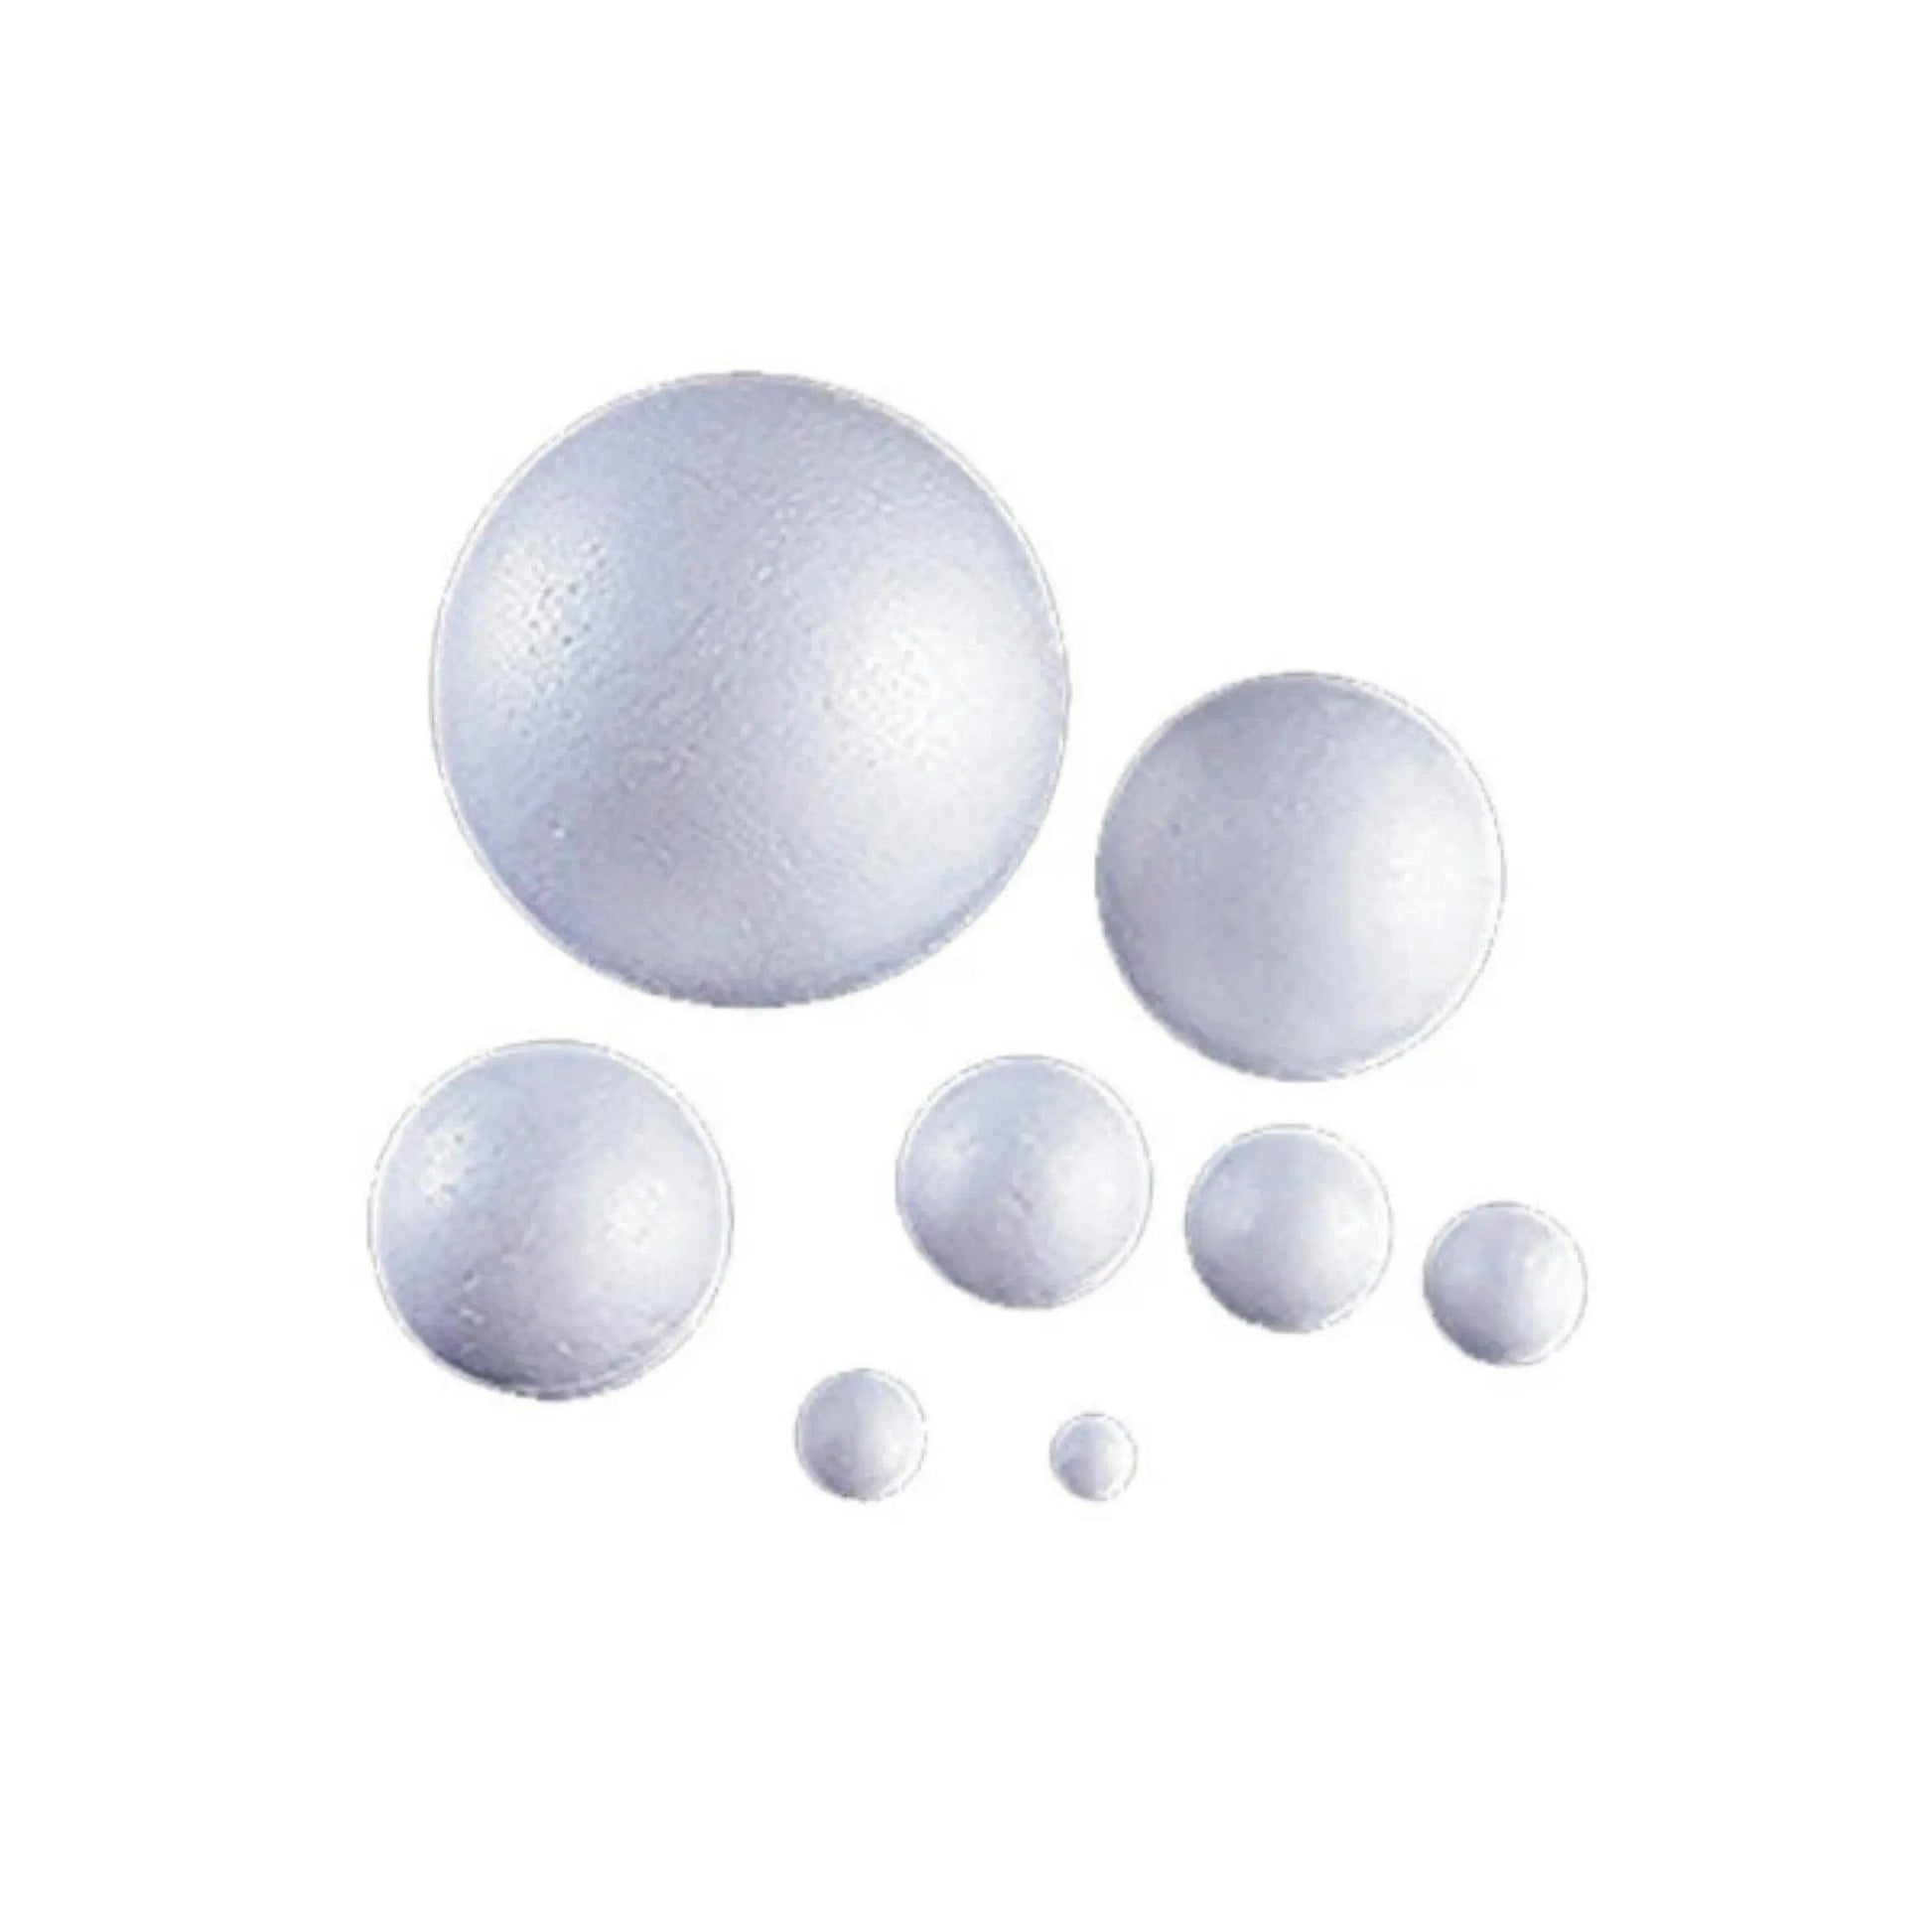 Thermopol ball 30 mm pkt (12pcs) The Stationers